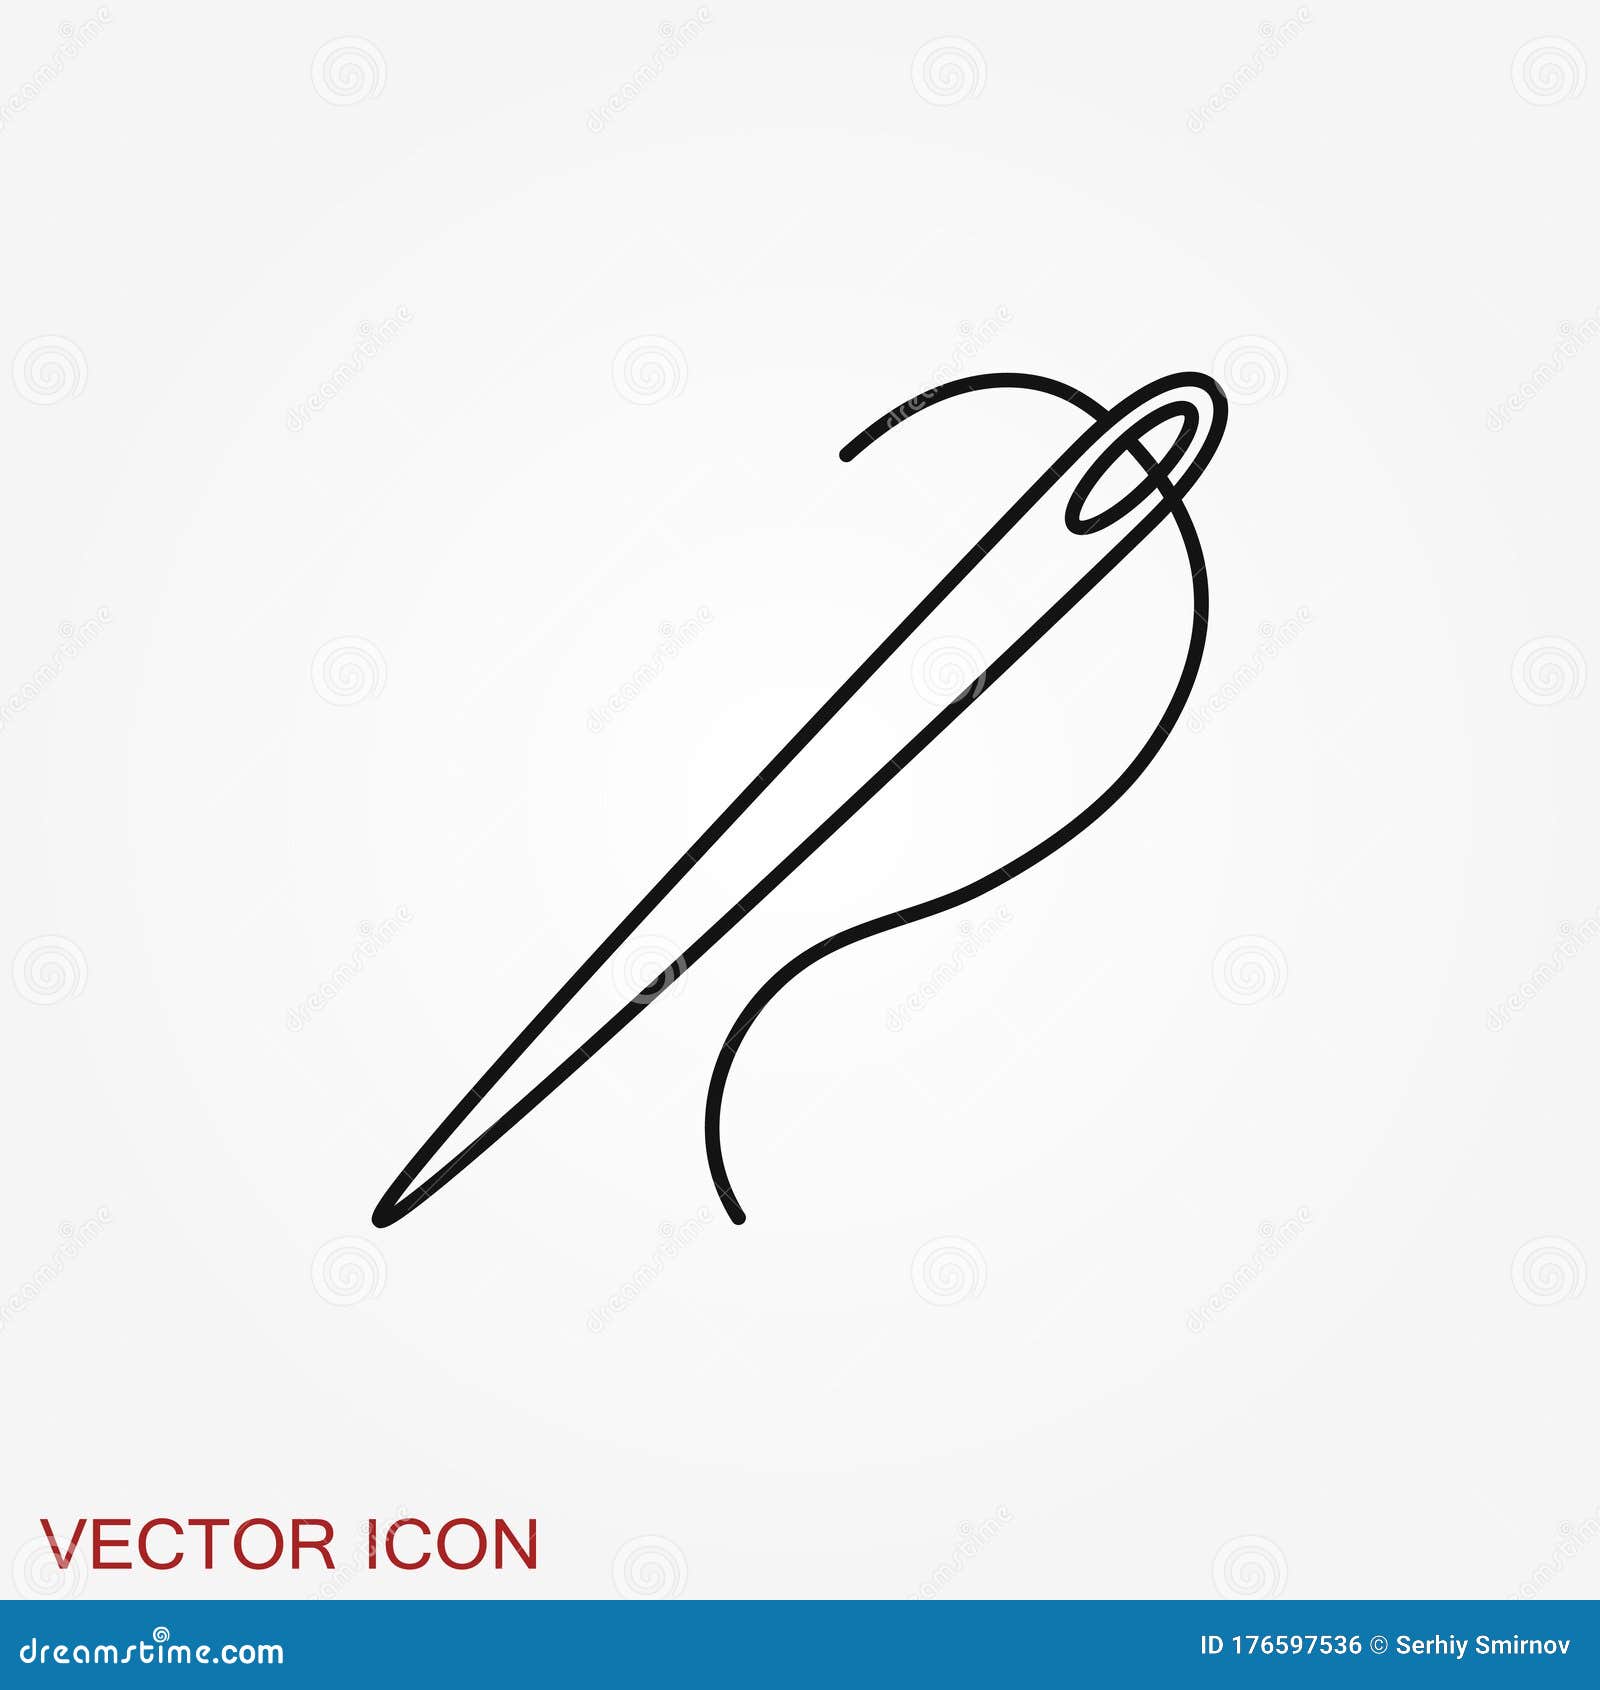 Needle Icon, Sewing Symbol or Element for Design Stock Illustration ...